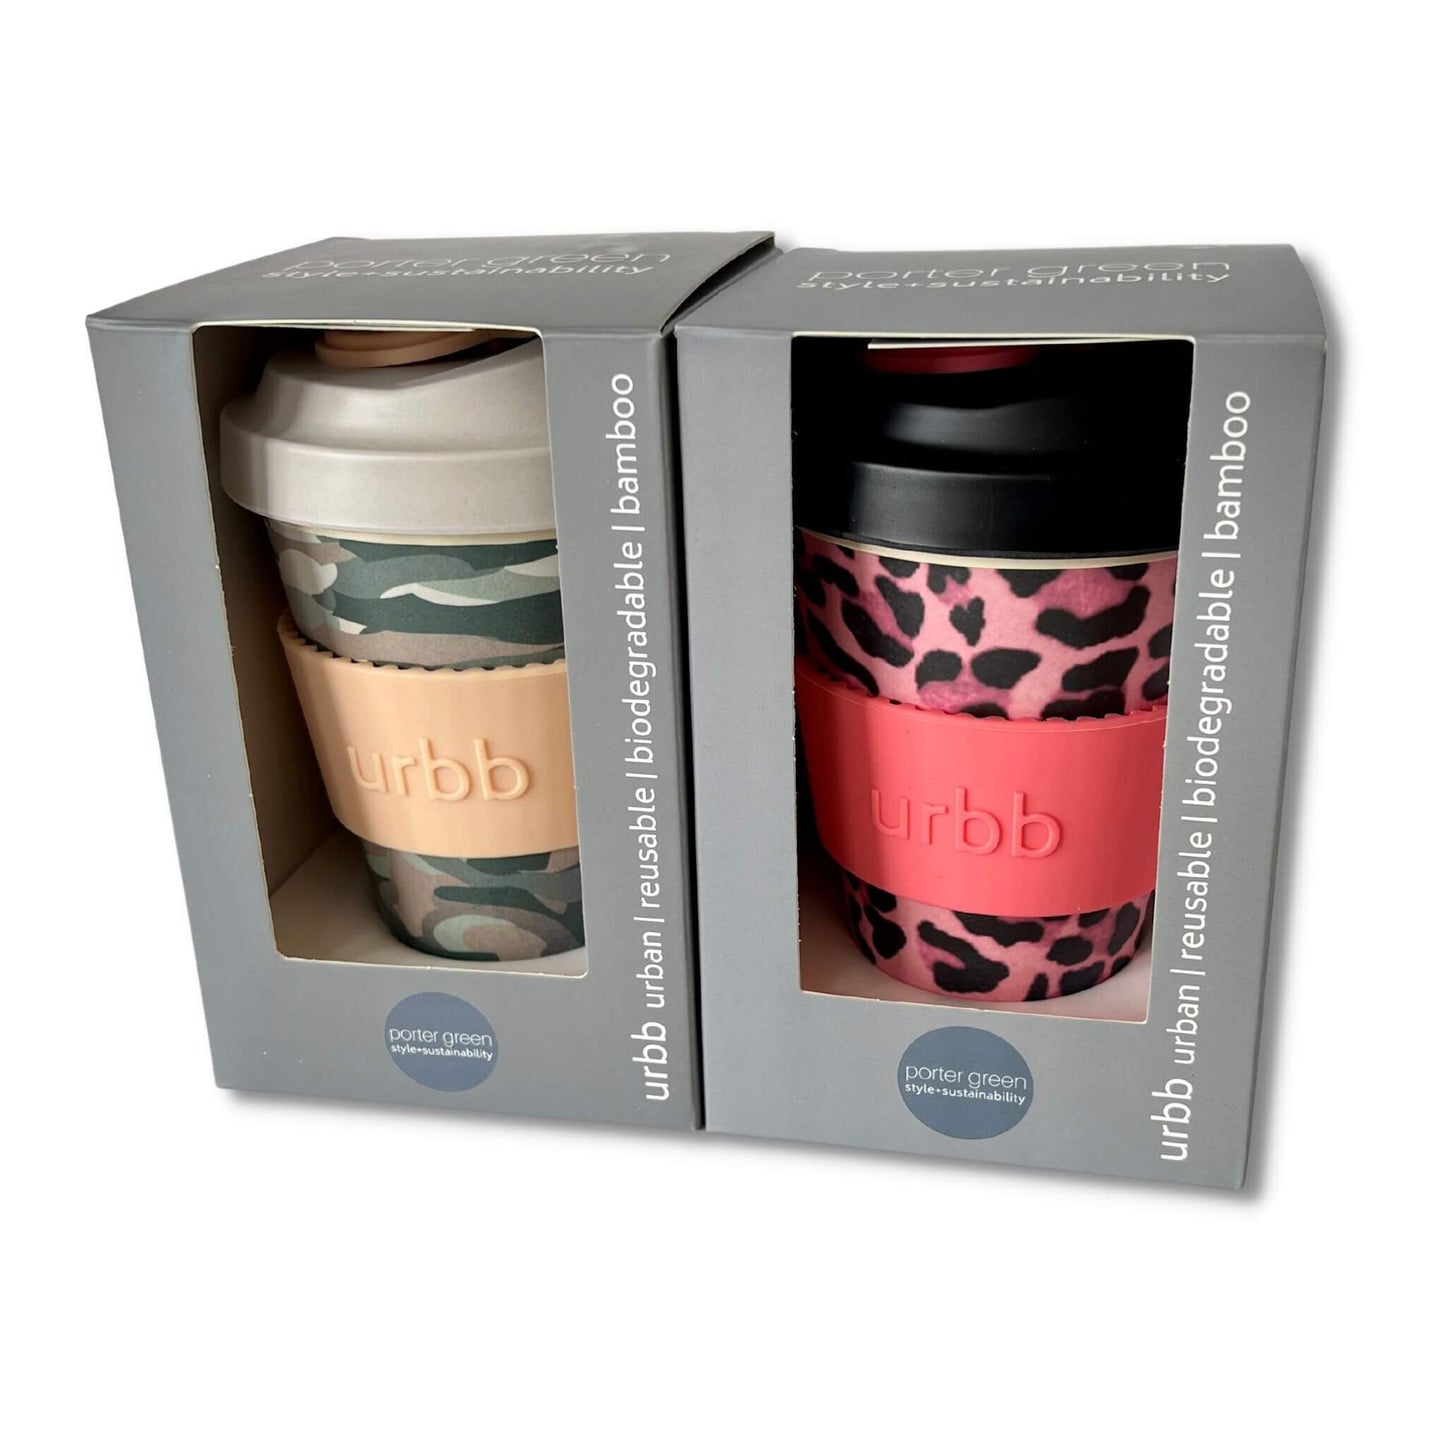 porter green urbb biodegradable coffee cup  - designs are pink leopard and camouflage